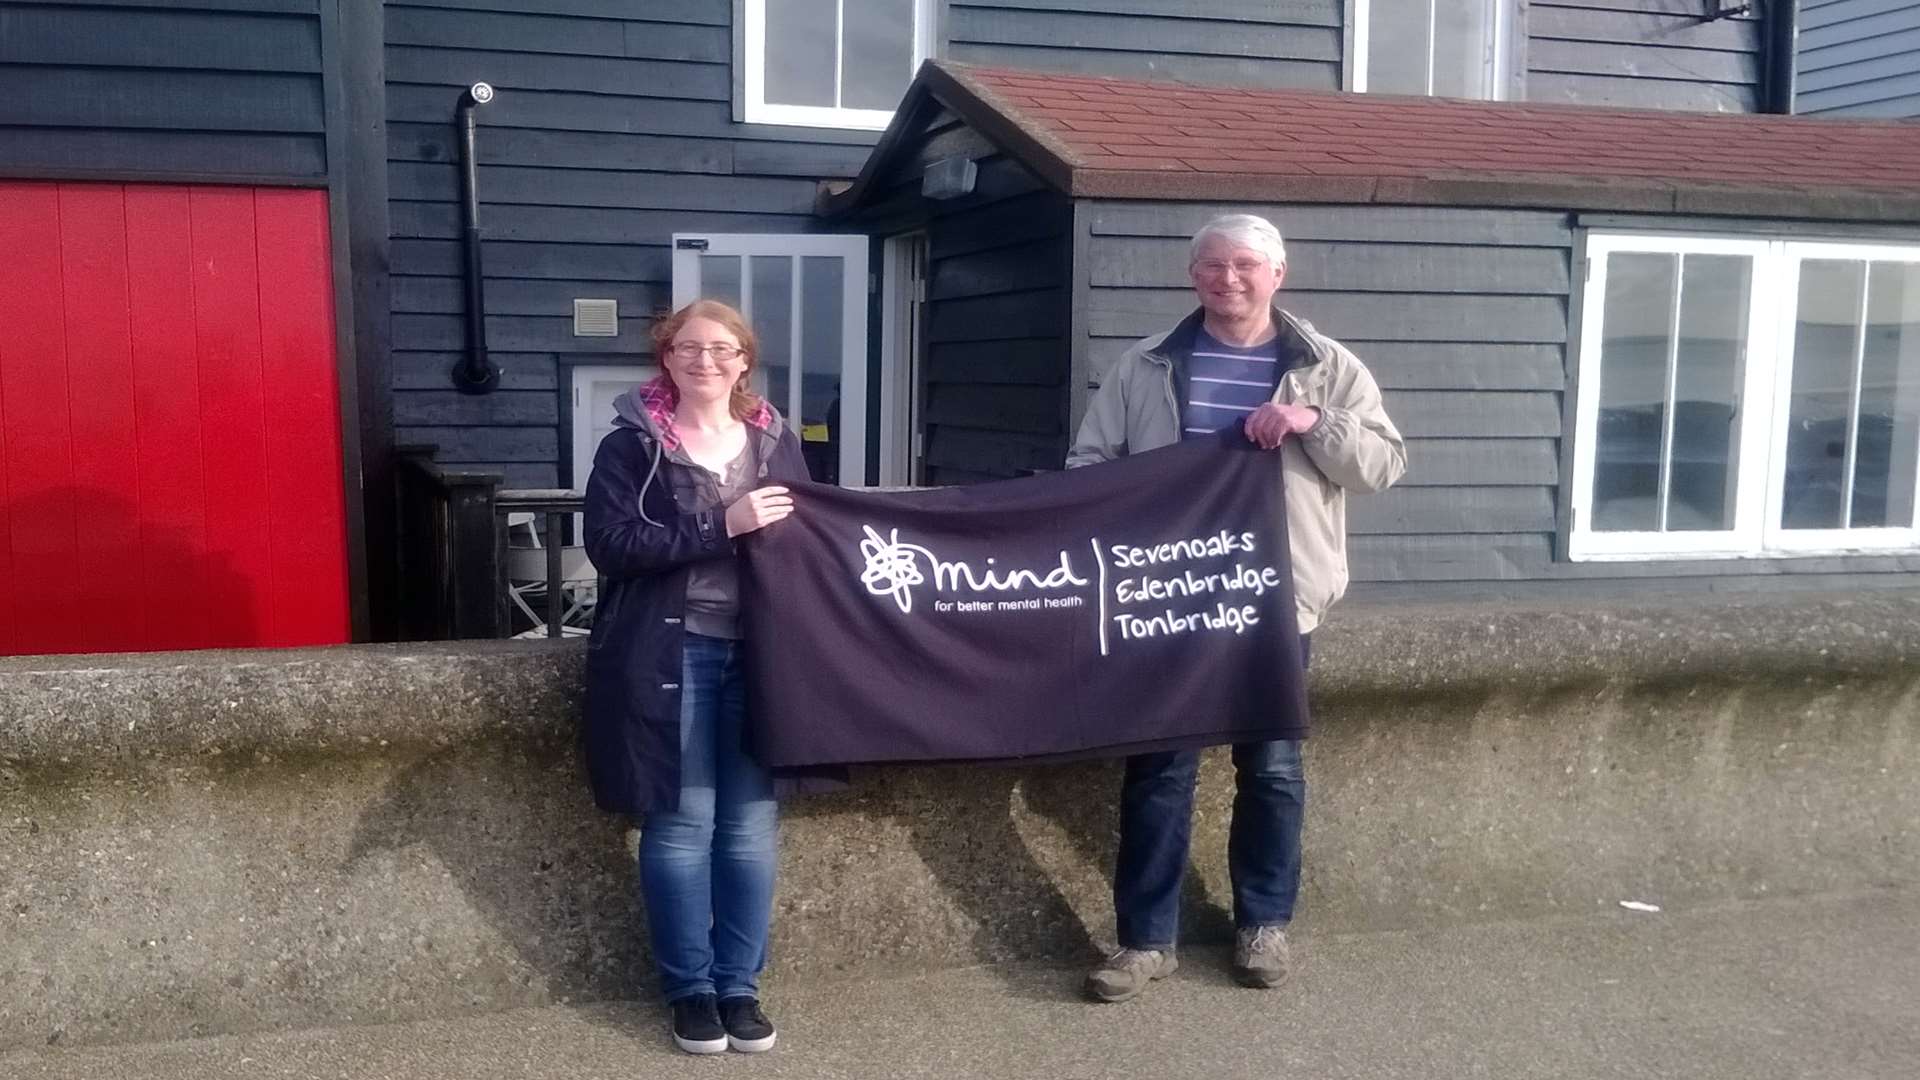 Chris Morgan and his daughter Katy enjoying the prize of a weekend at a Whitstable Fisherman's Hut after Chris was the biggest individual fundraiser at the KM Abseil Challenge in Maidstone